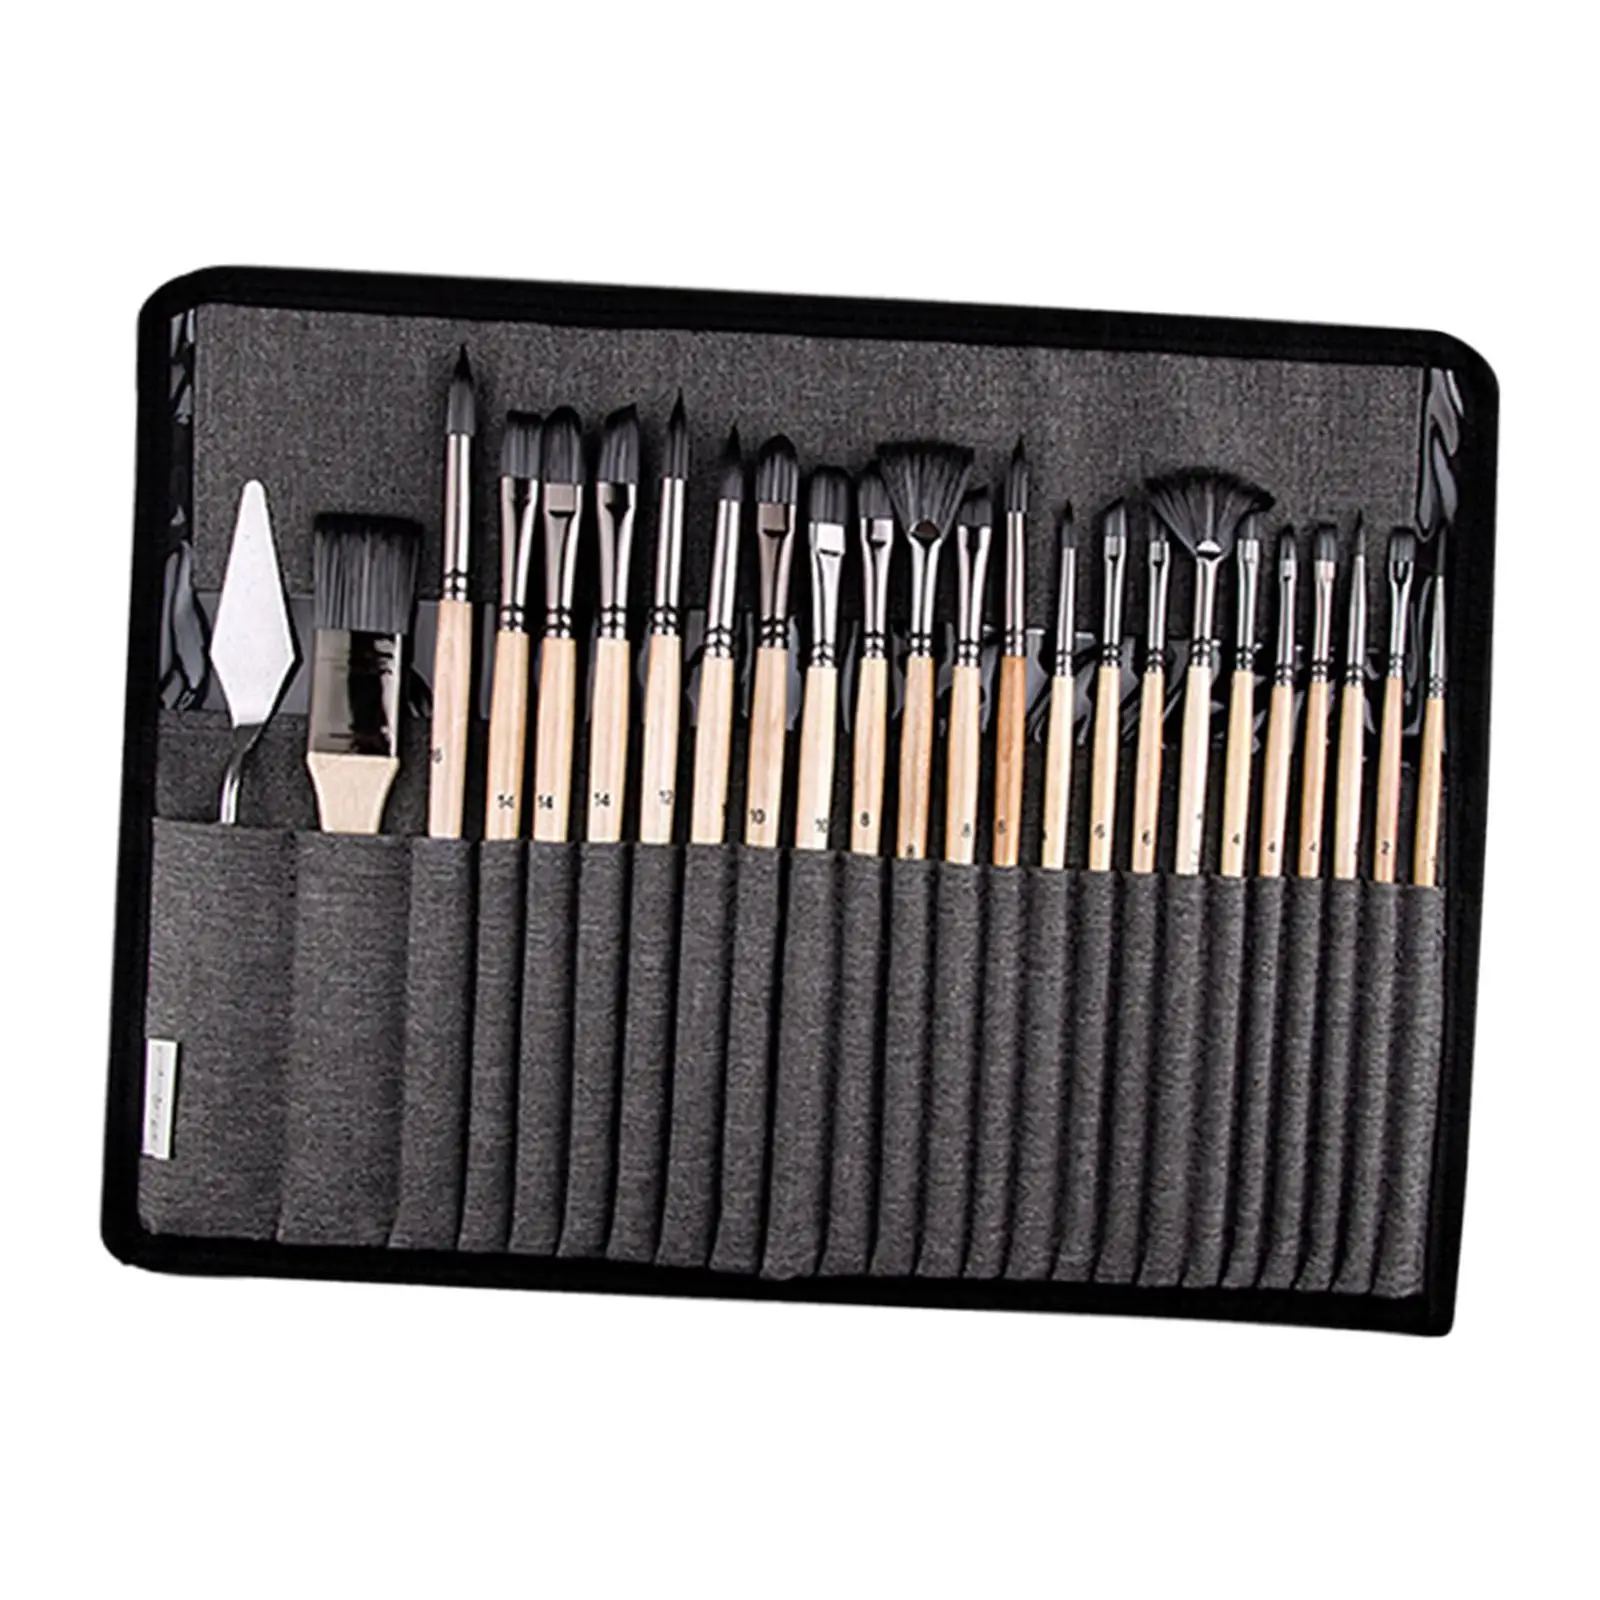 25x Painting Brushes Easy Cleaning Gouache Comfortable Gripping Watercolor Paint Brush Set with Storage Bag Paintbrushes